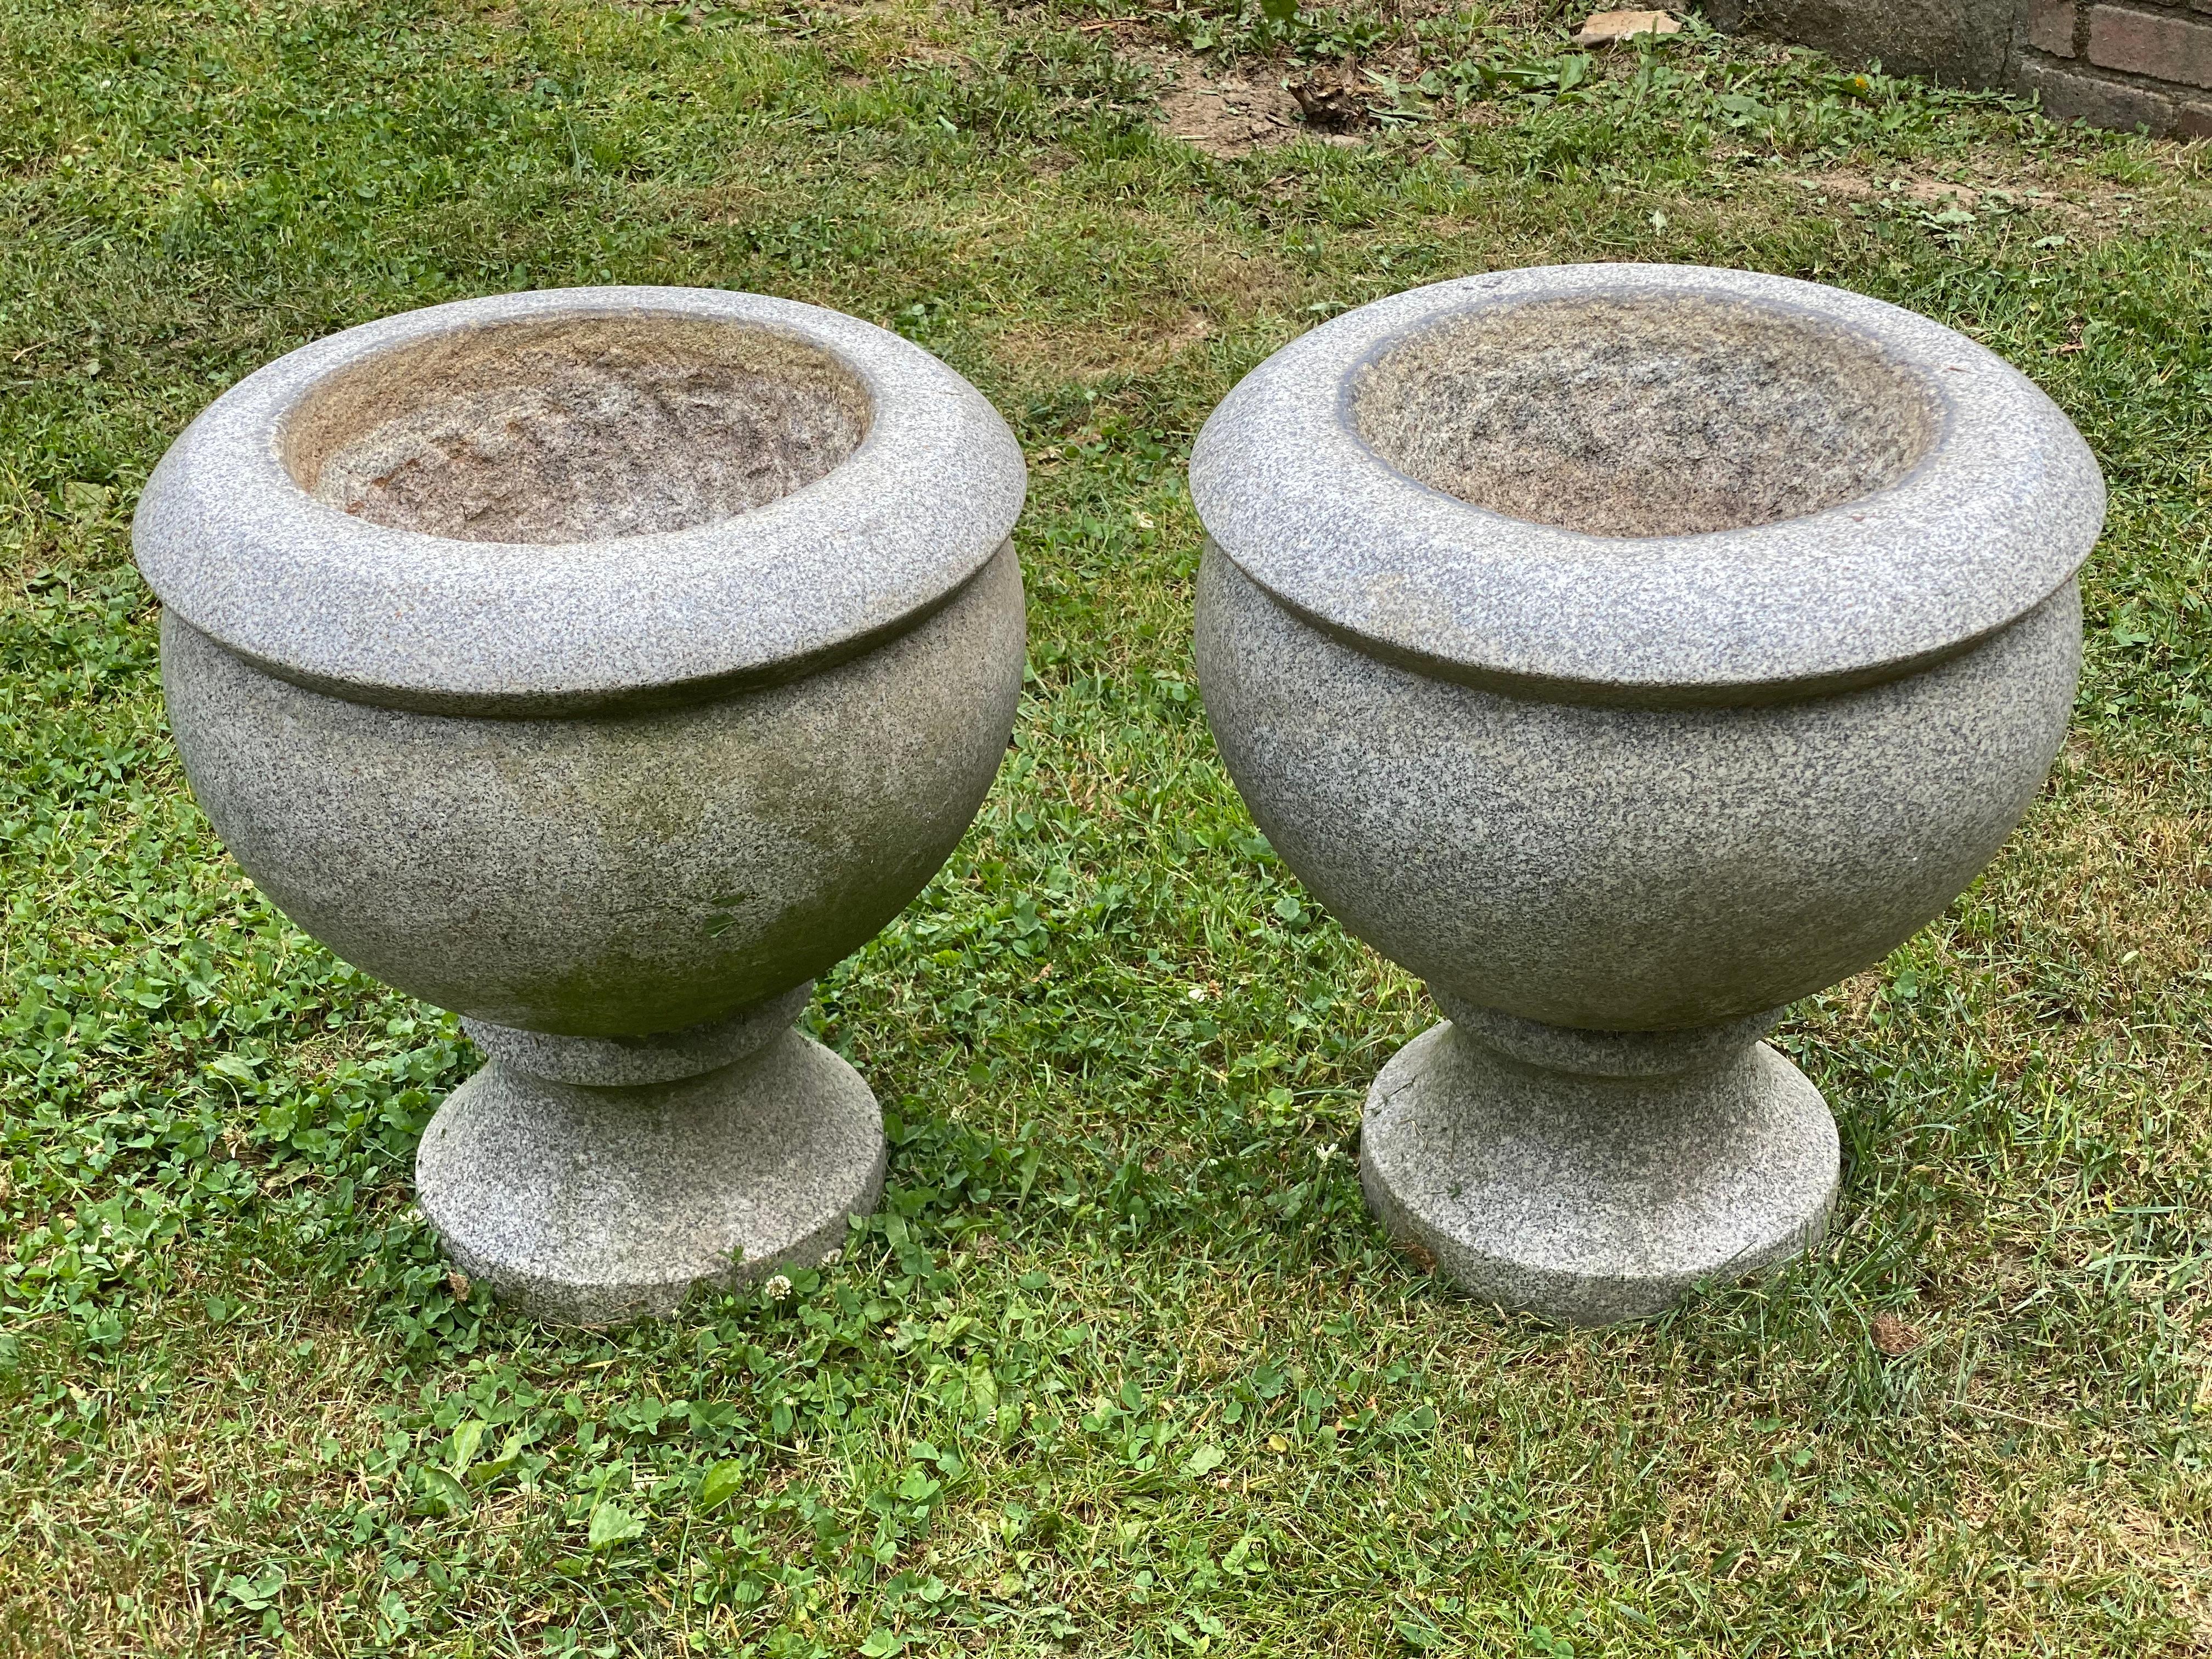 Other Polished Granite Planters, a Pair